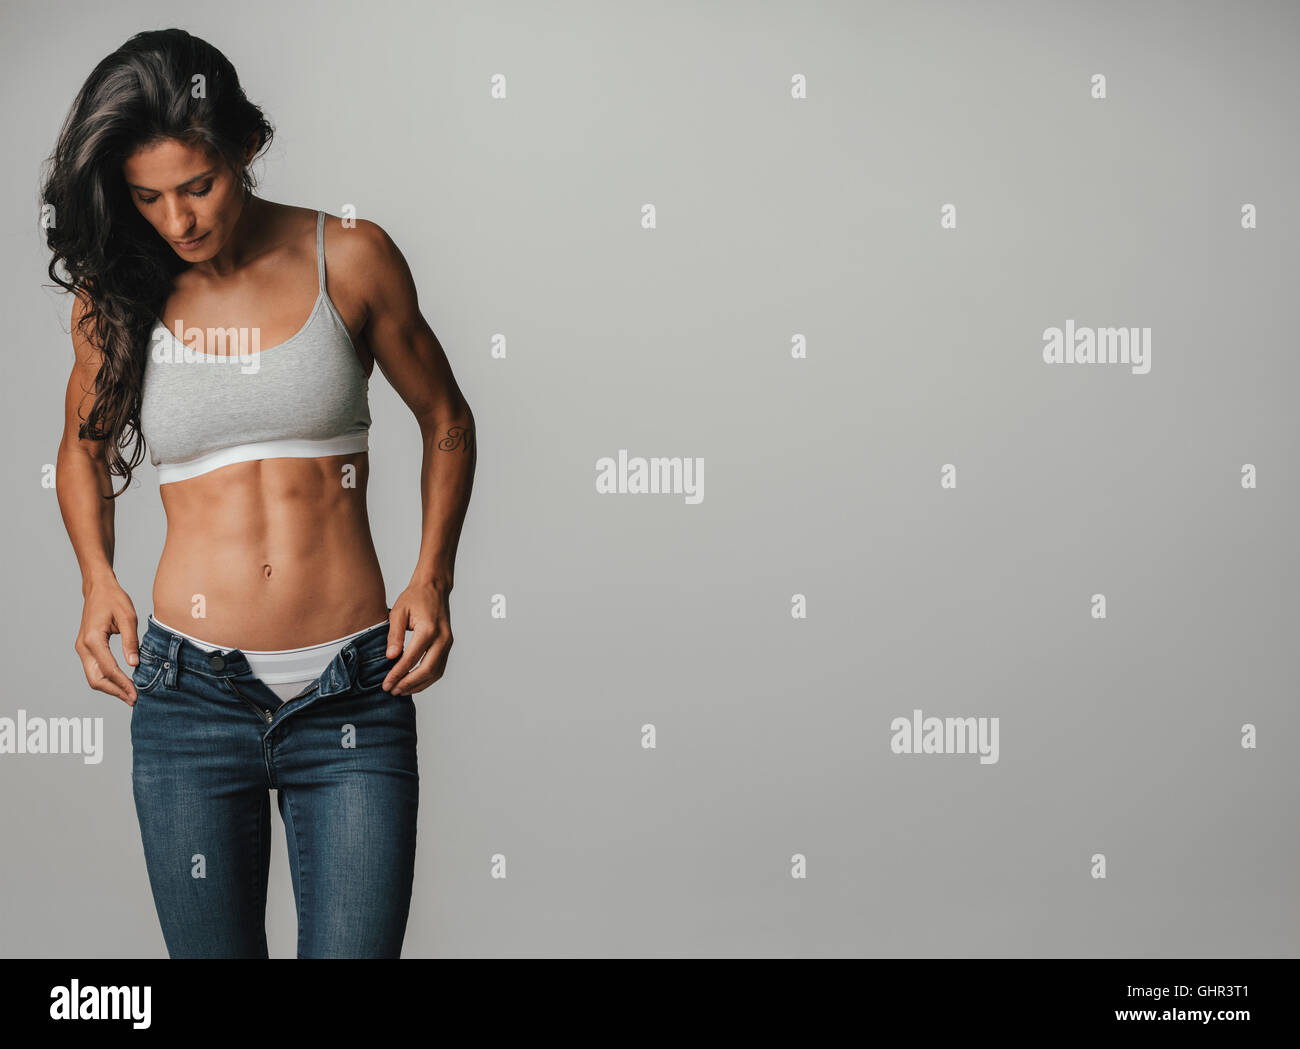 Woman standing with hands by her pockets looks downward while wearing unzipped jeans and halter top Stock Photo